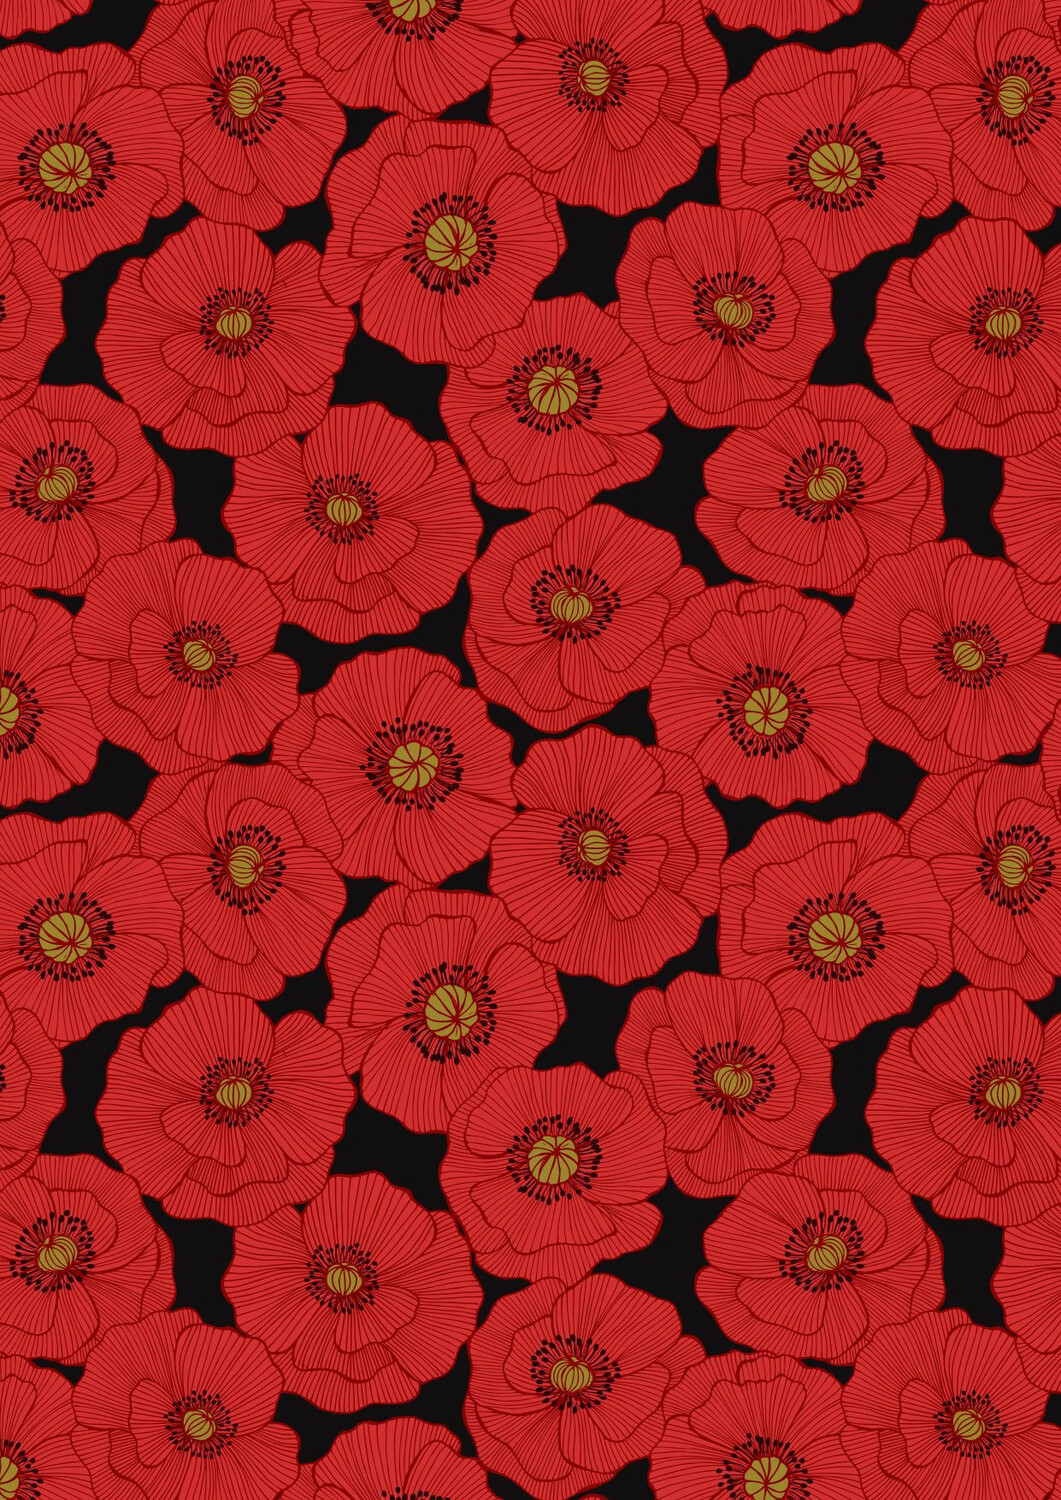 Lewis & Irene - Poppies - Large Poppy On Black A554.3 (Width of Fabric By 25cm) - R3